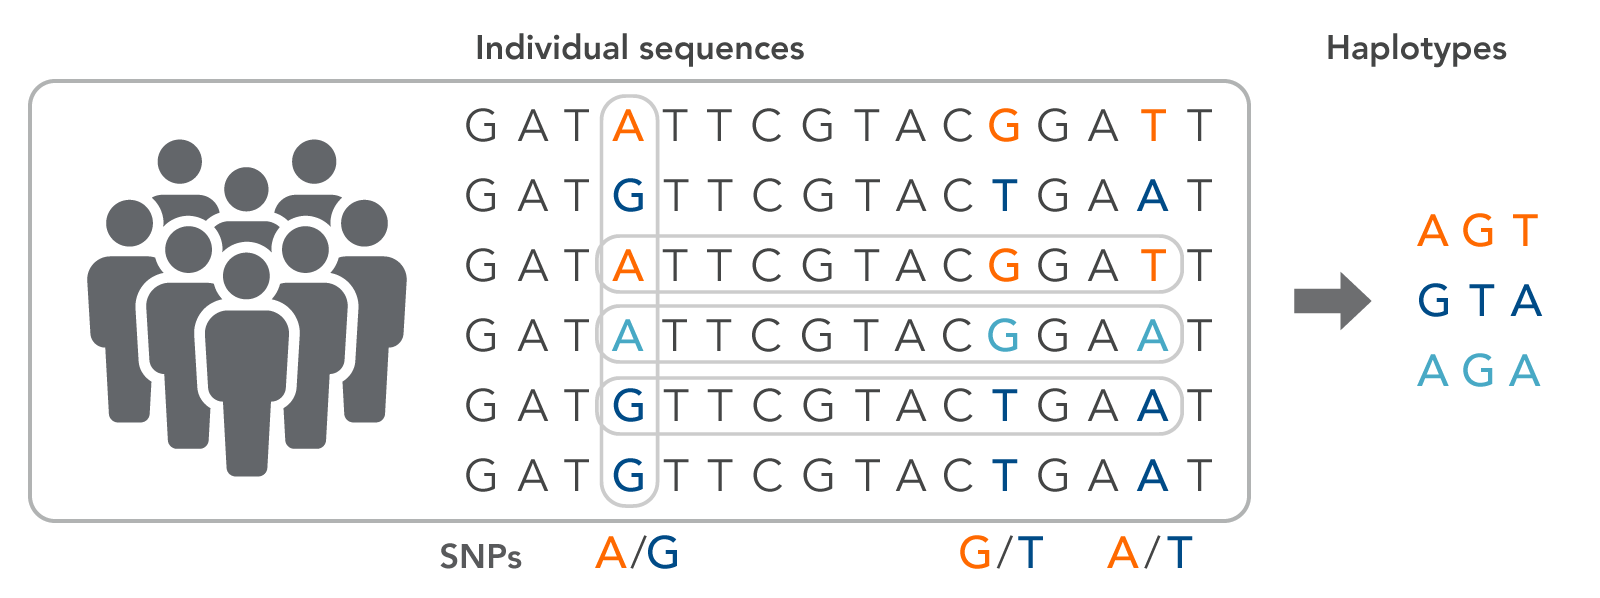 Multiple adjacent SNPs in an individual define a haplotype.